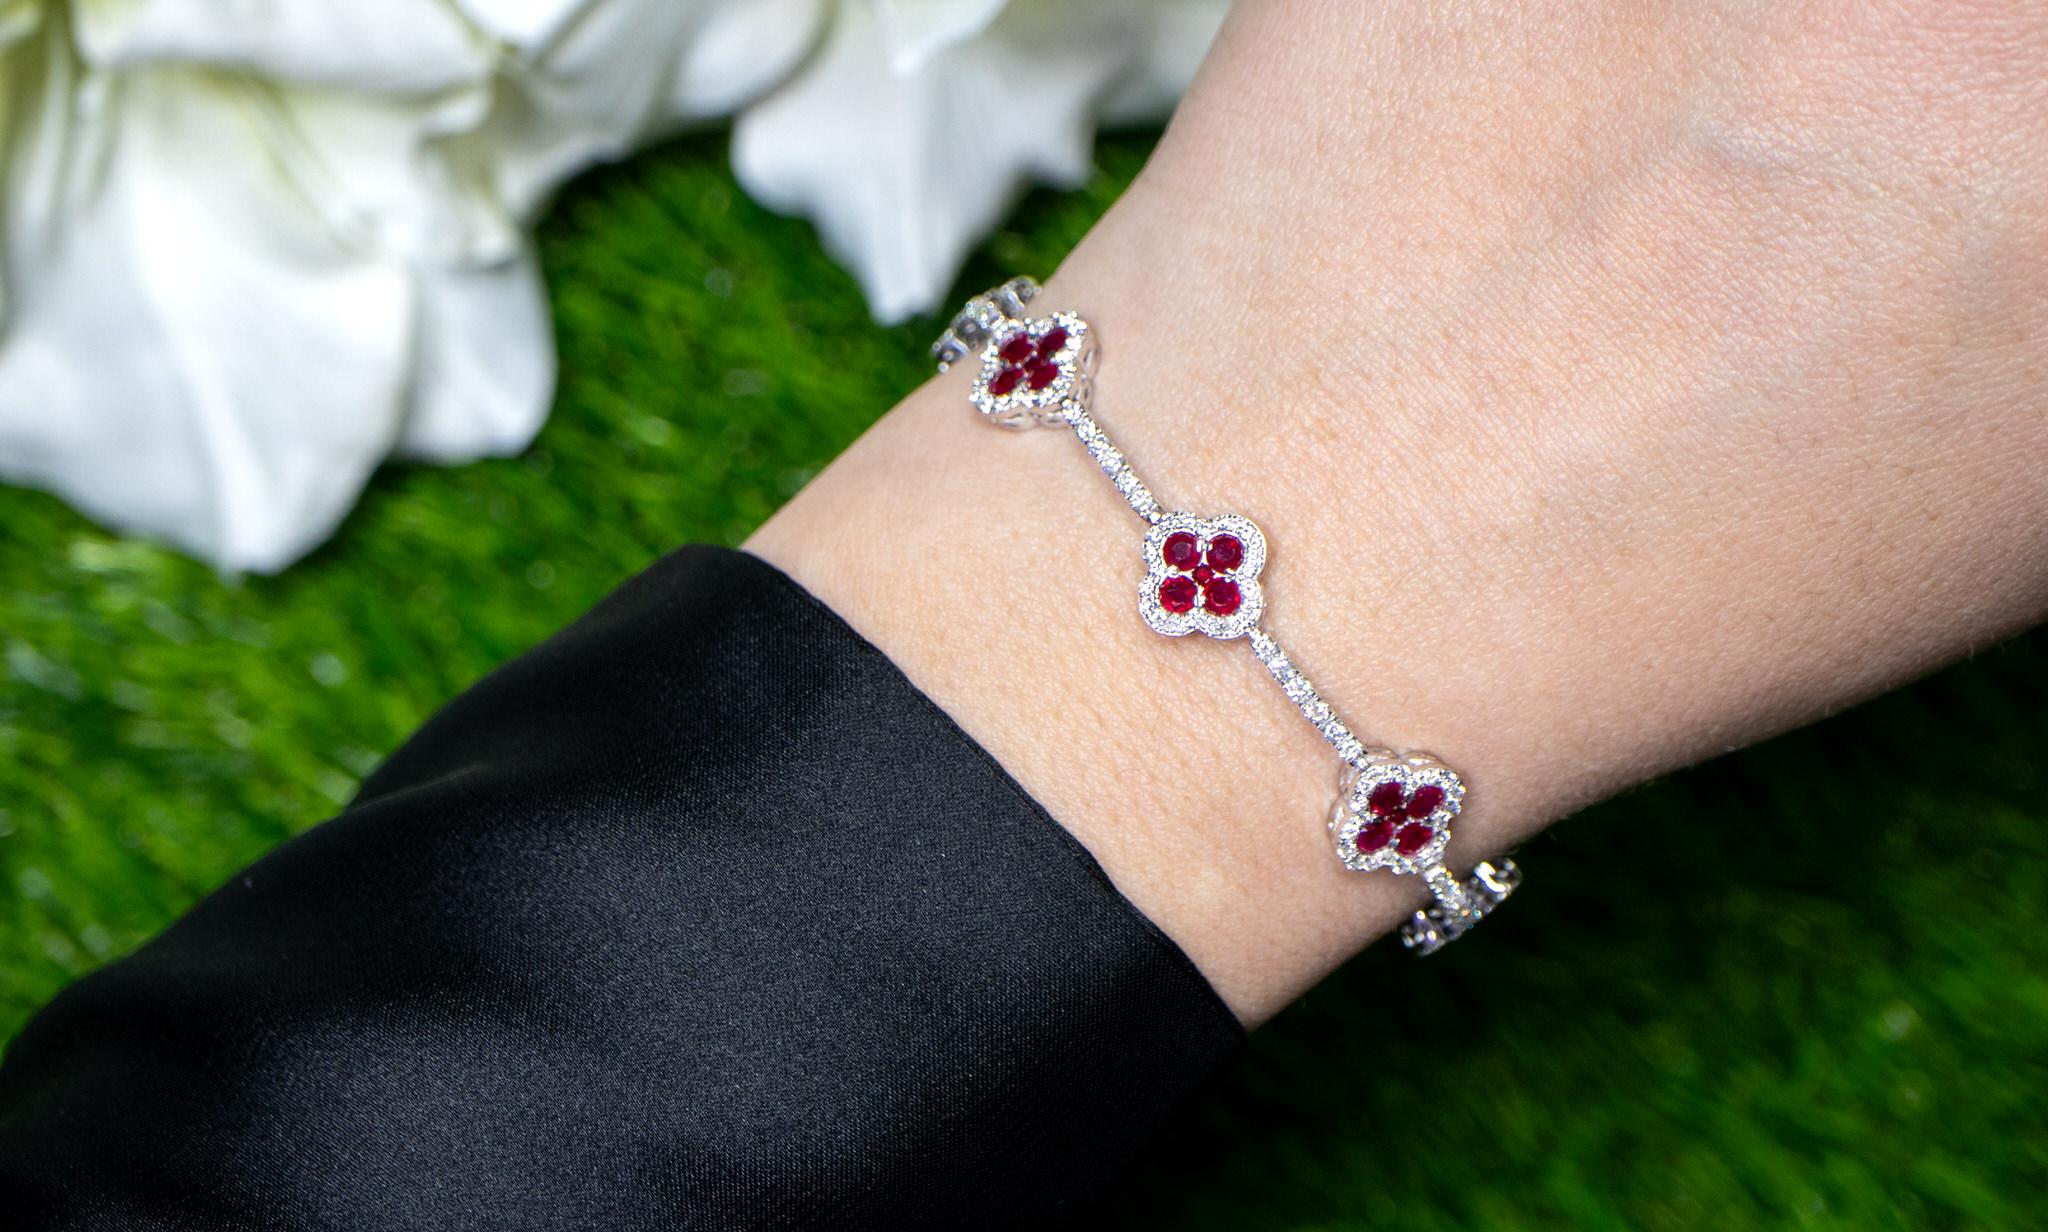 Clover Ruby Bracelet Diamond Links 6.47 Carats 18K White Gold In New Condition For Sale In Laguna Niguel, CA